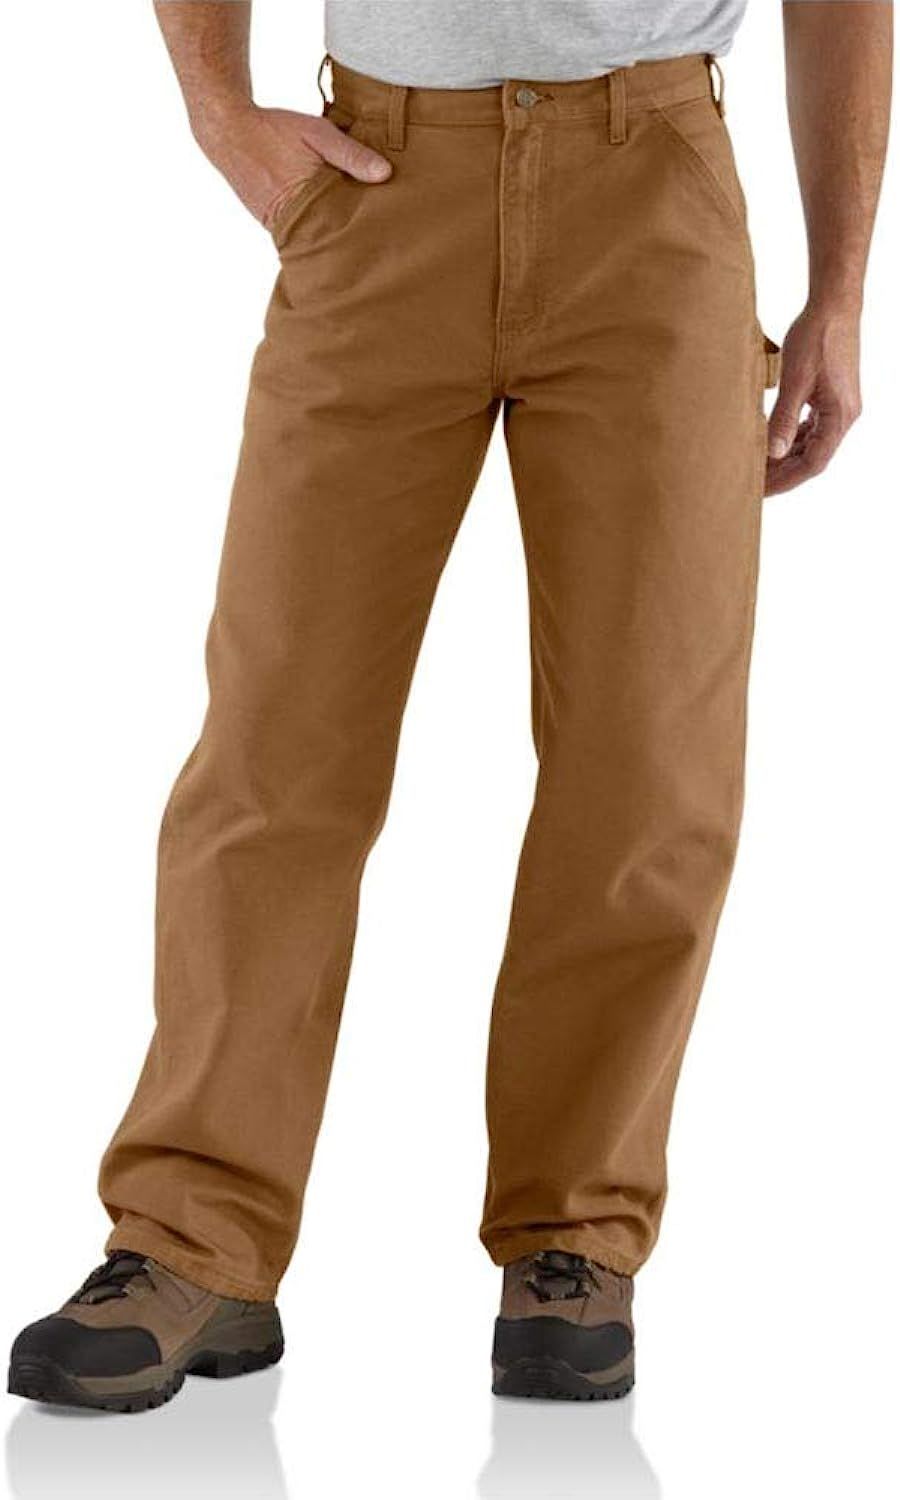 Carhartt Men's Loose Fit Washed Duck Utility Work Pant | Amazon (US)